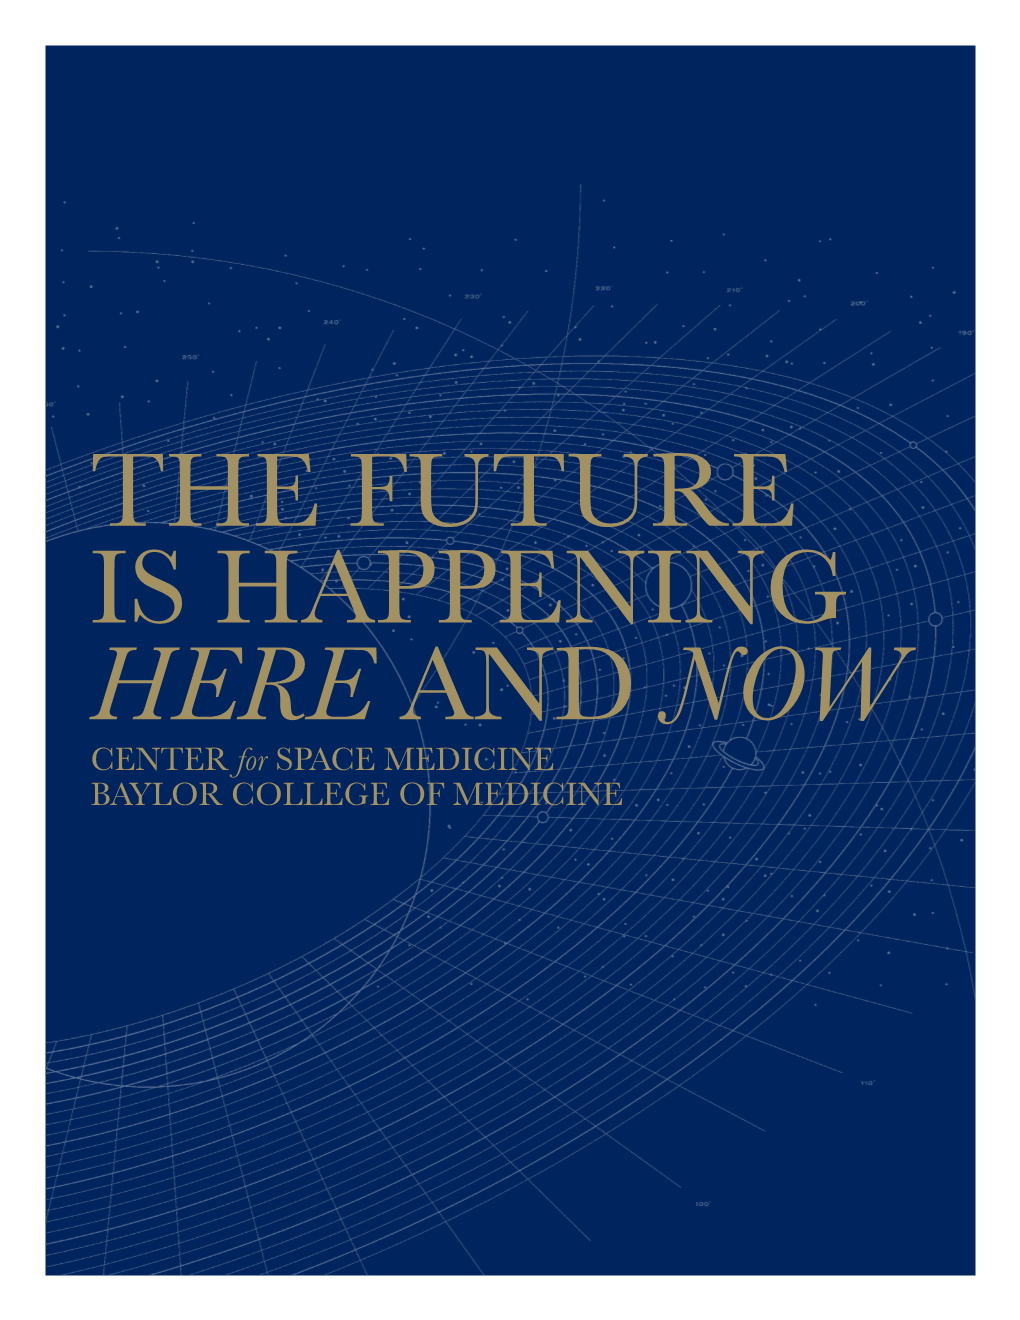 The Future Is Happening Here and Now Center for Space Medicine Baylor College of Medicine